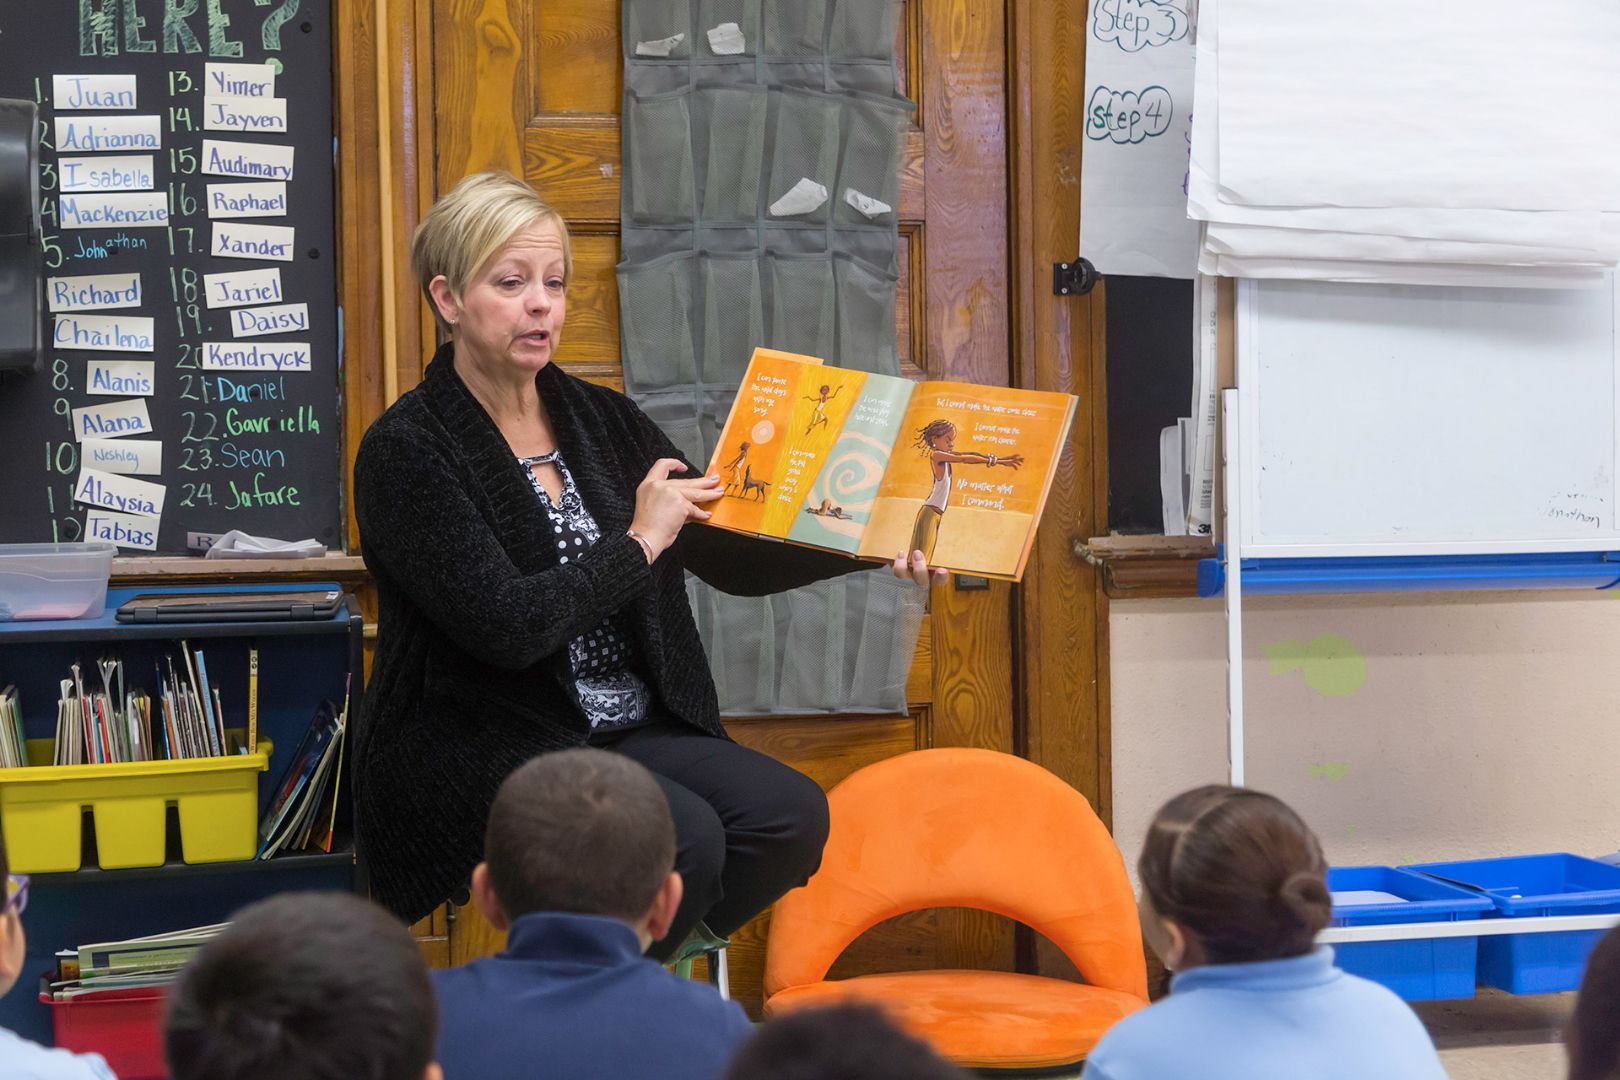 A woman is reading a book to a group of children